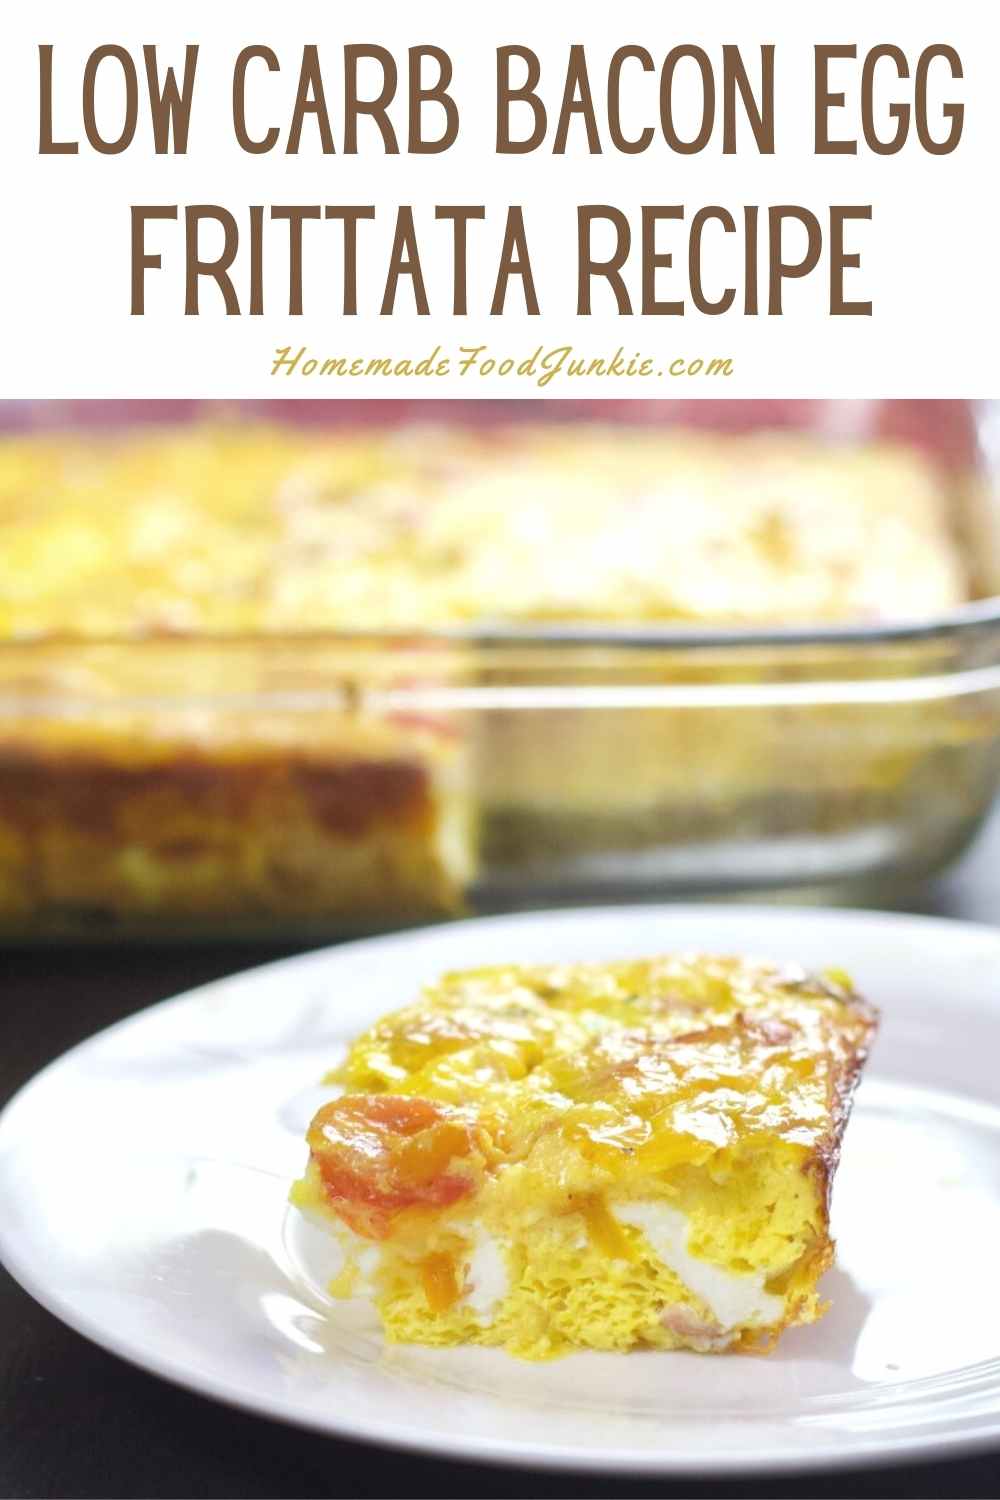 Low Carb Bacon Egg Frittata Recipe-Pin Image